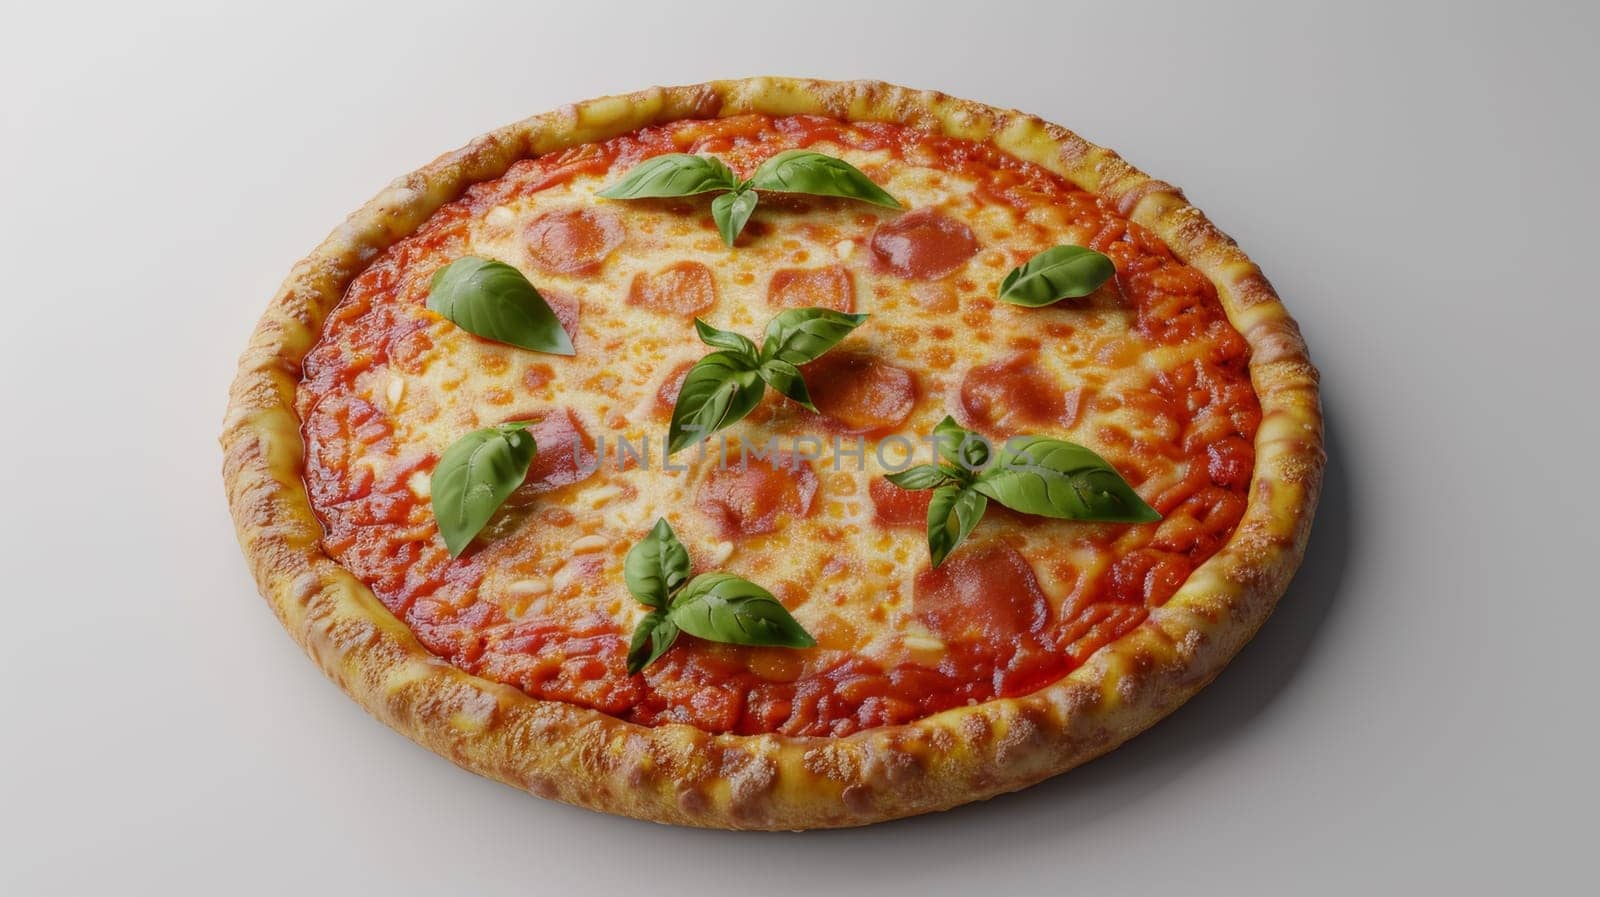 A pizza with basil leaves on top of it sitting on a table